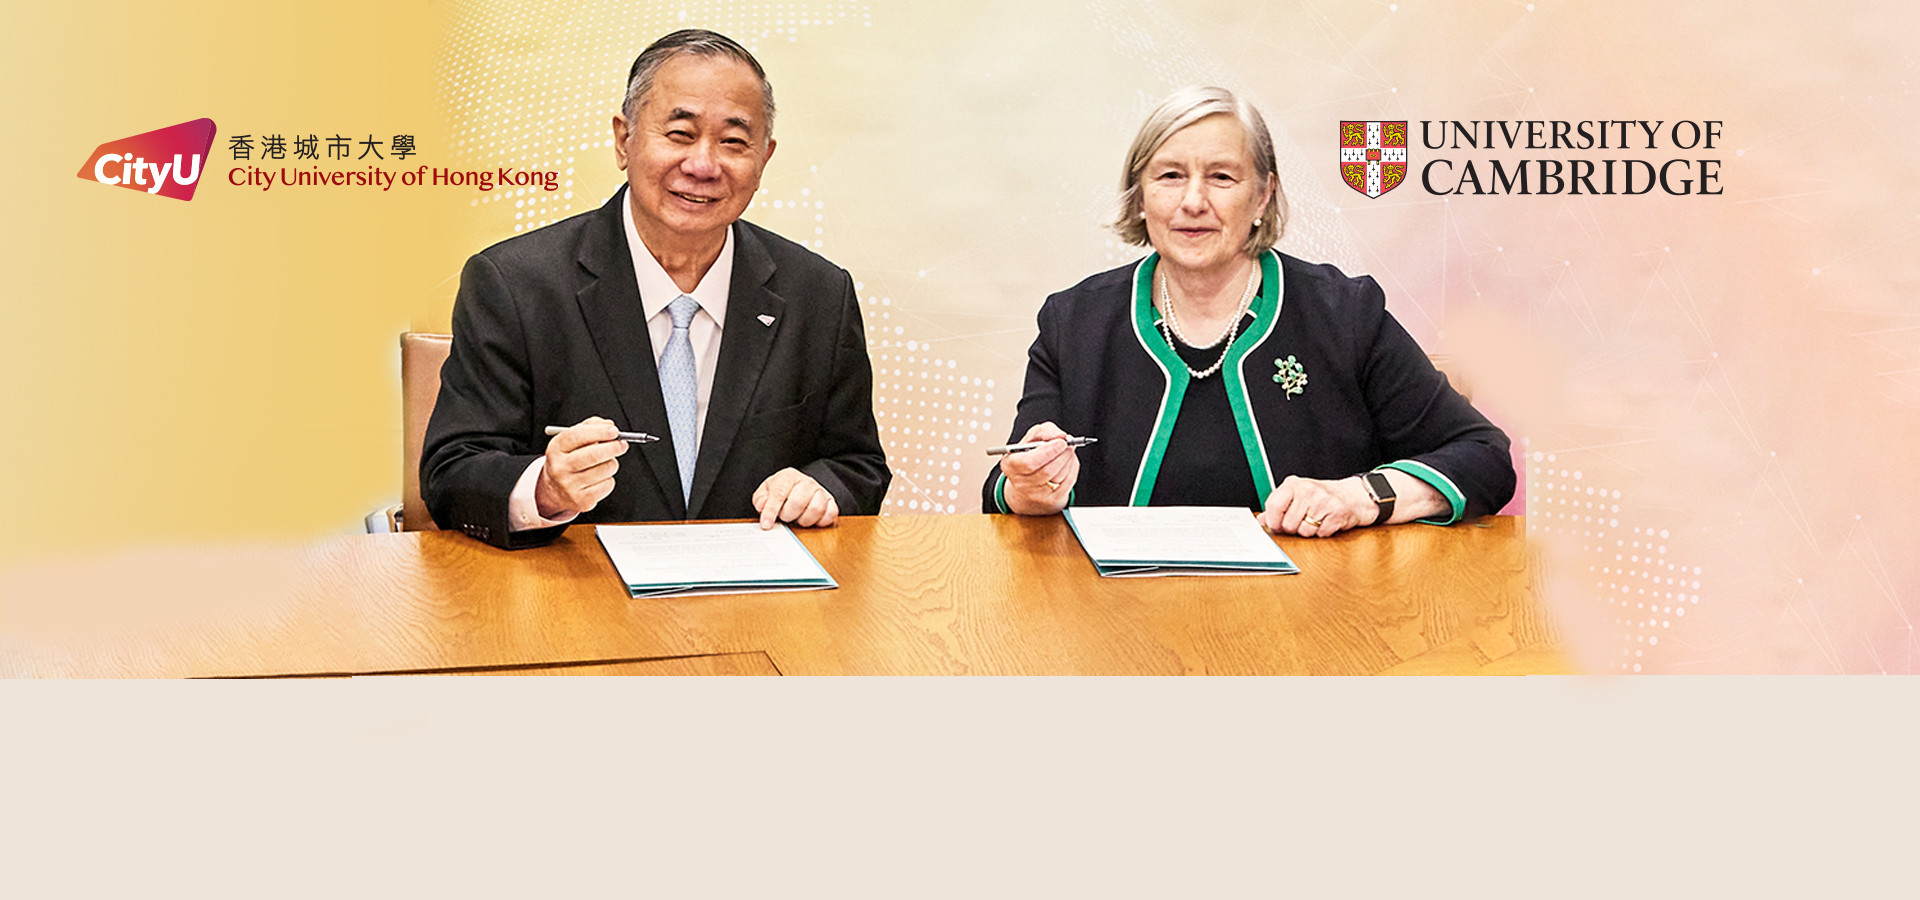 Academic collaboration with Cambridge’s Lucy Cavendish College n through new partnership